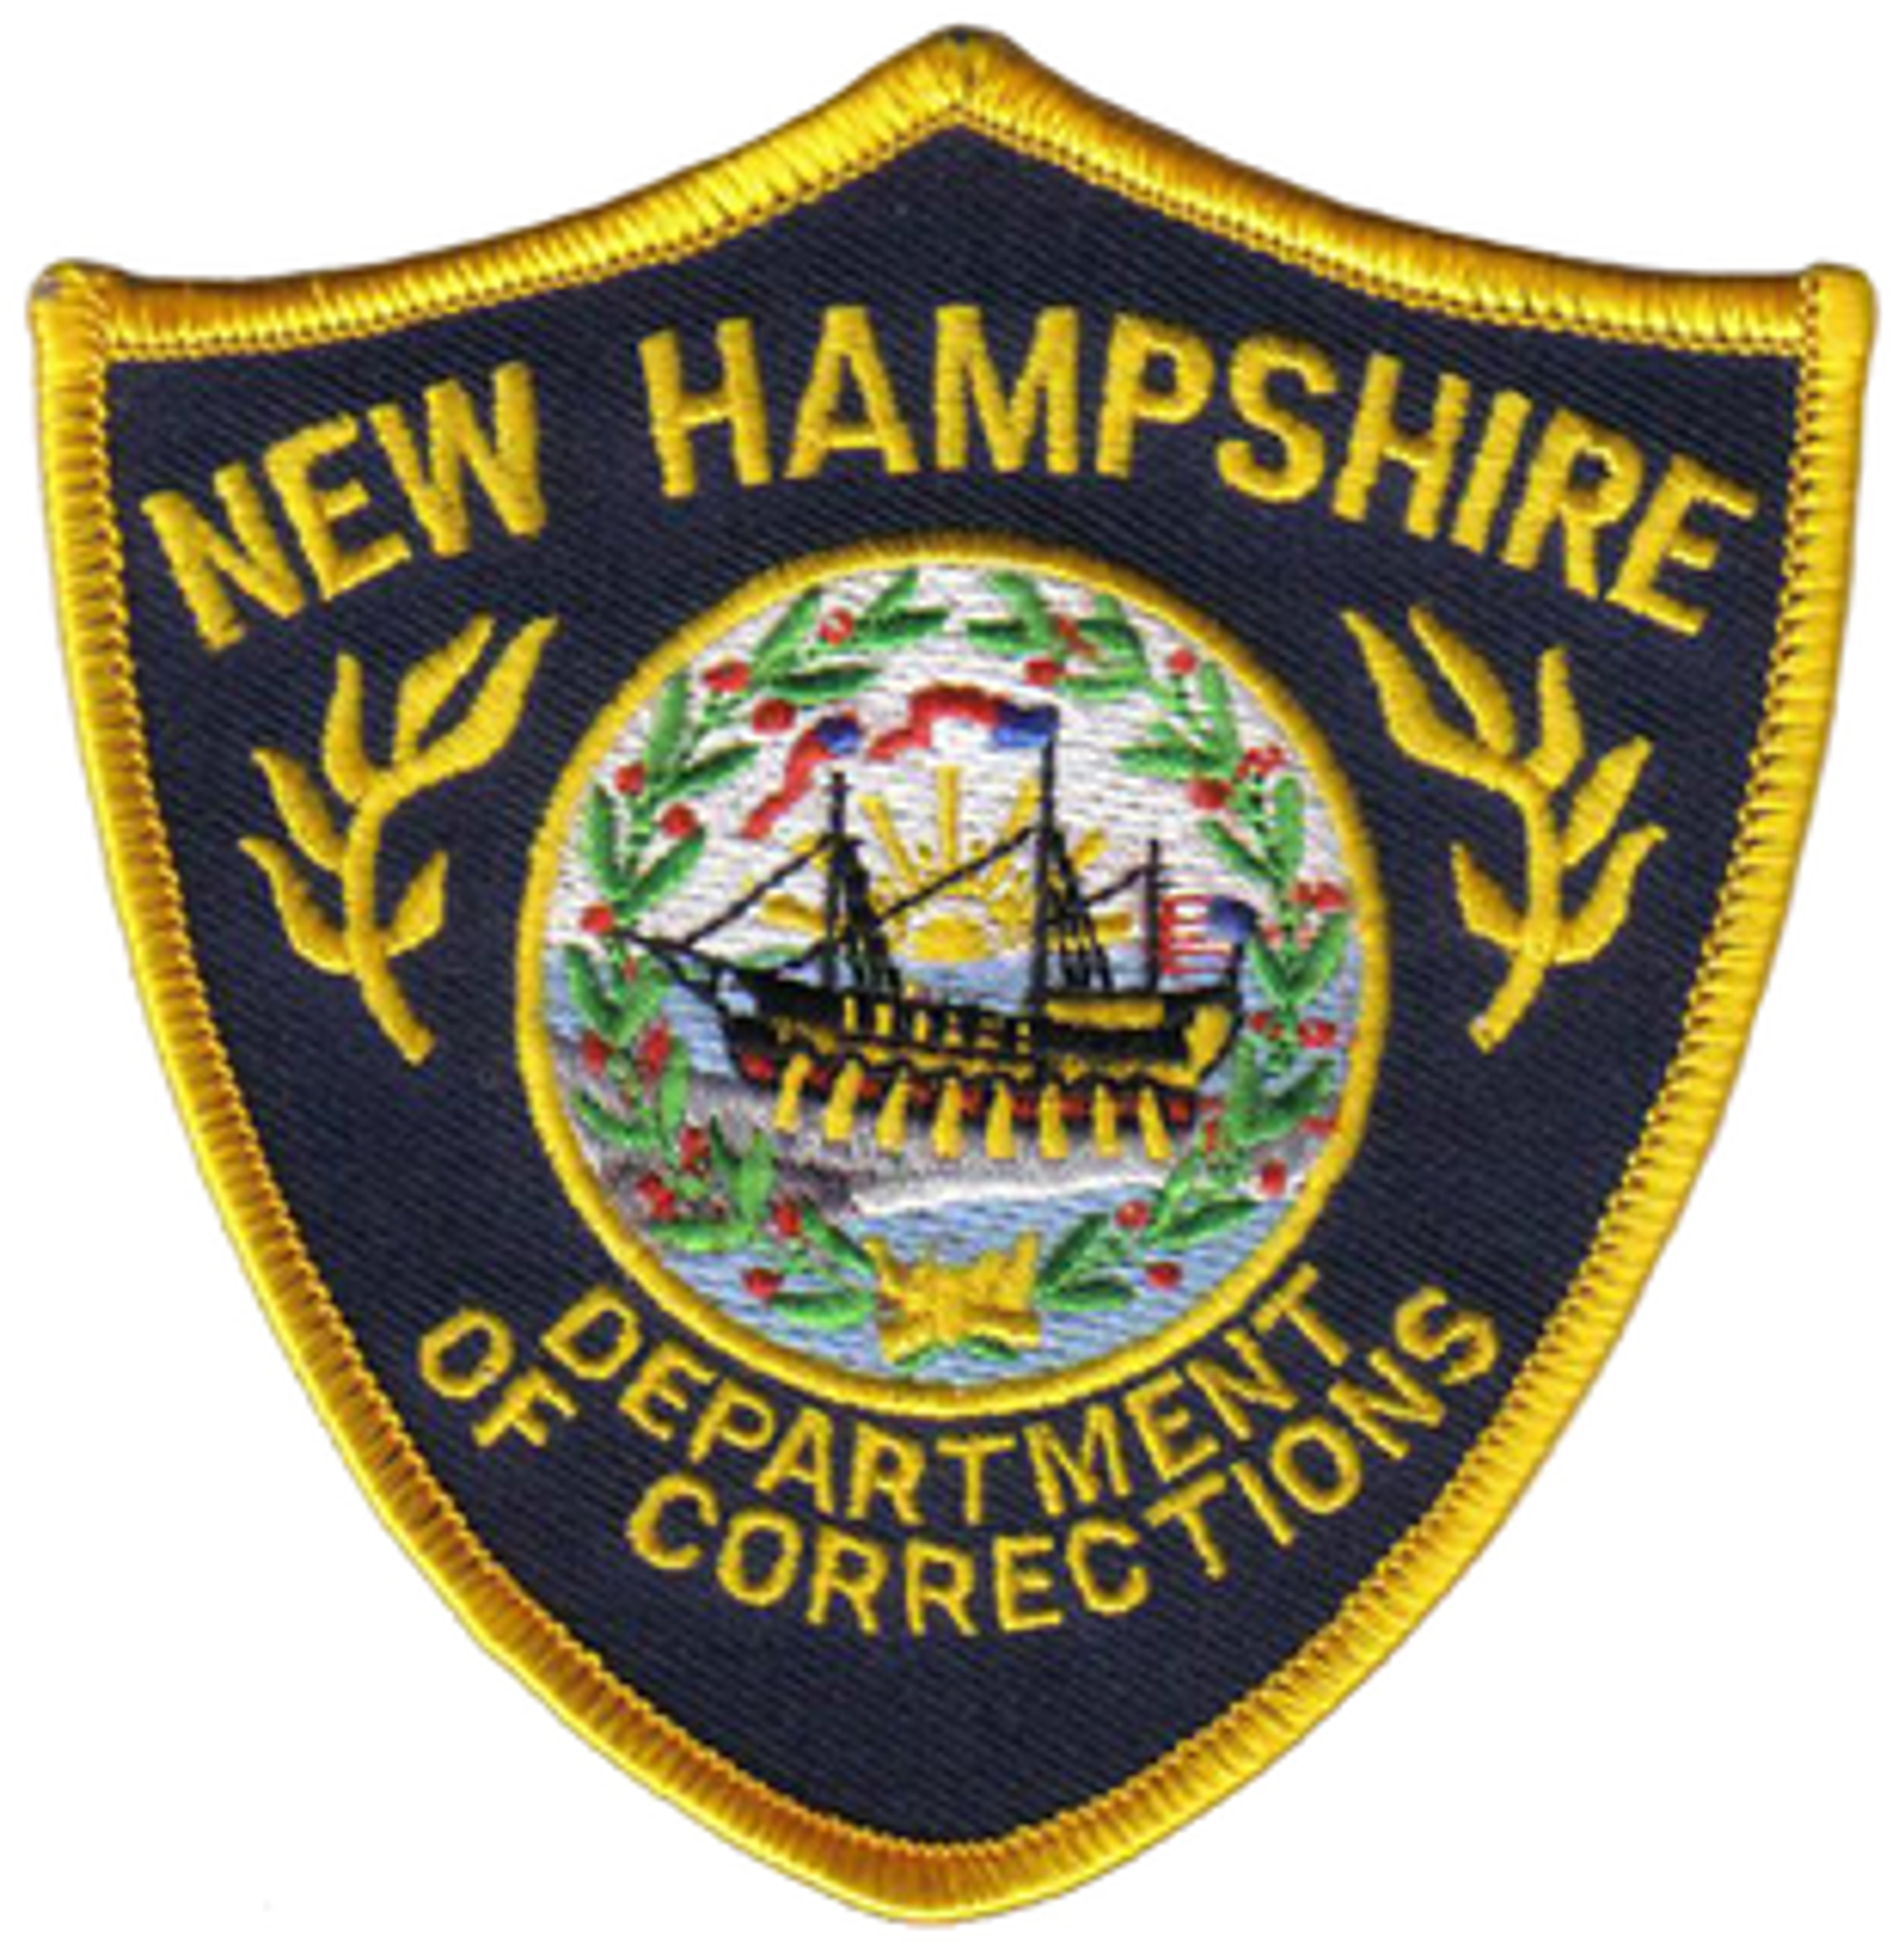 New Hampshire Dept. of Corrections Police Patch